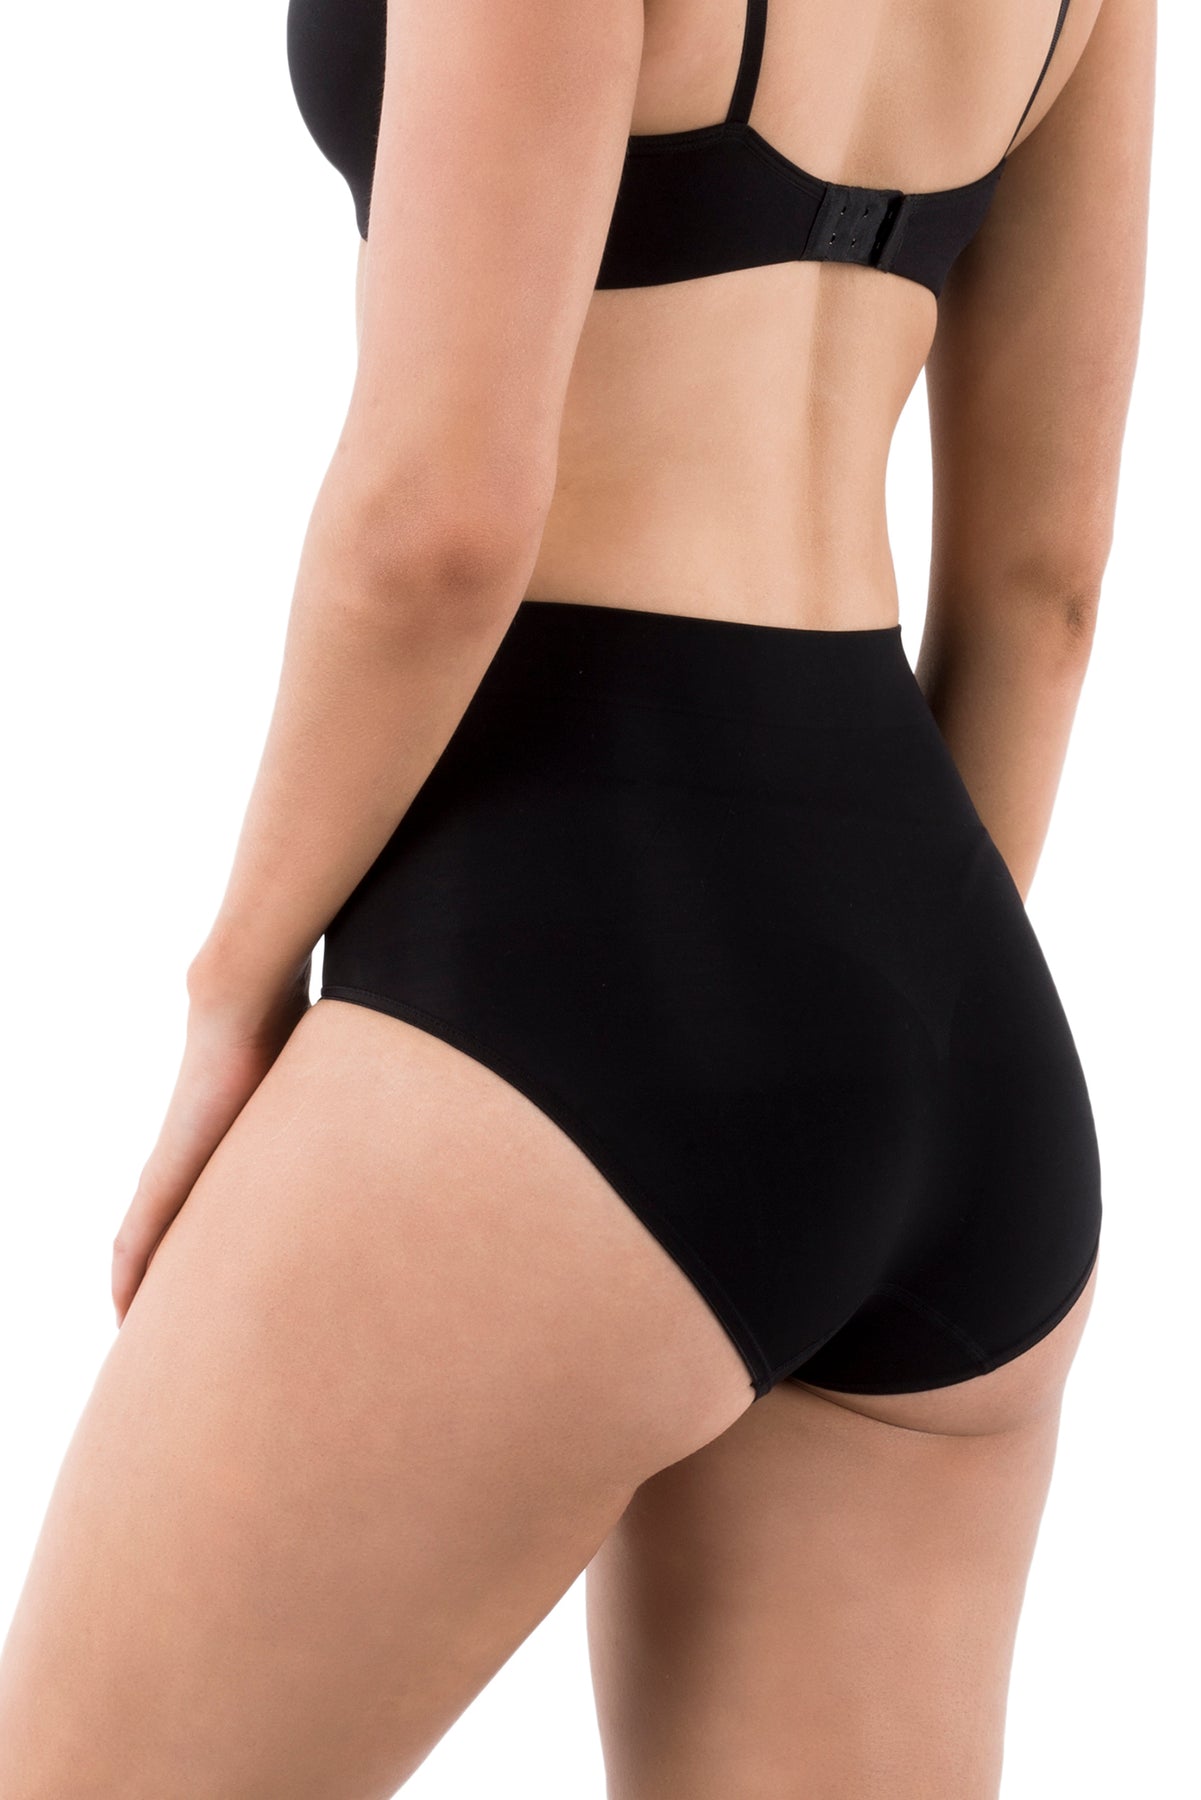 Ambra Powerlite High Waisted Shortie Tummy Control Knickers in